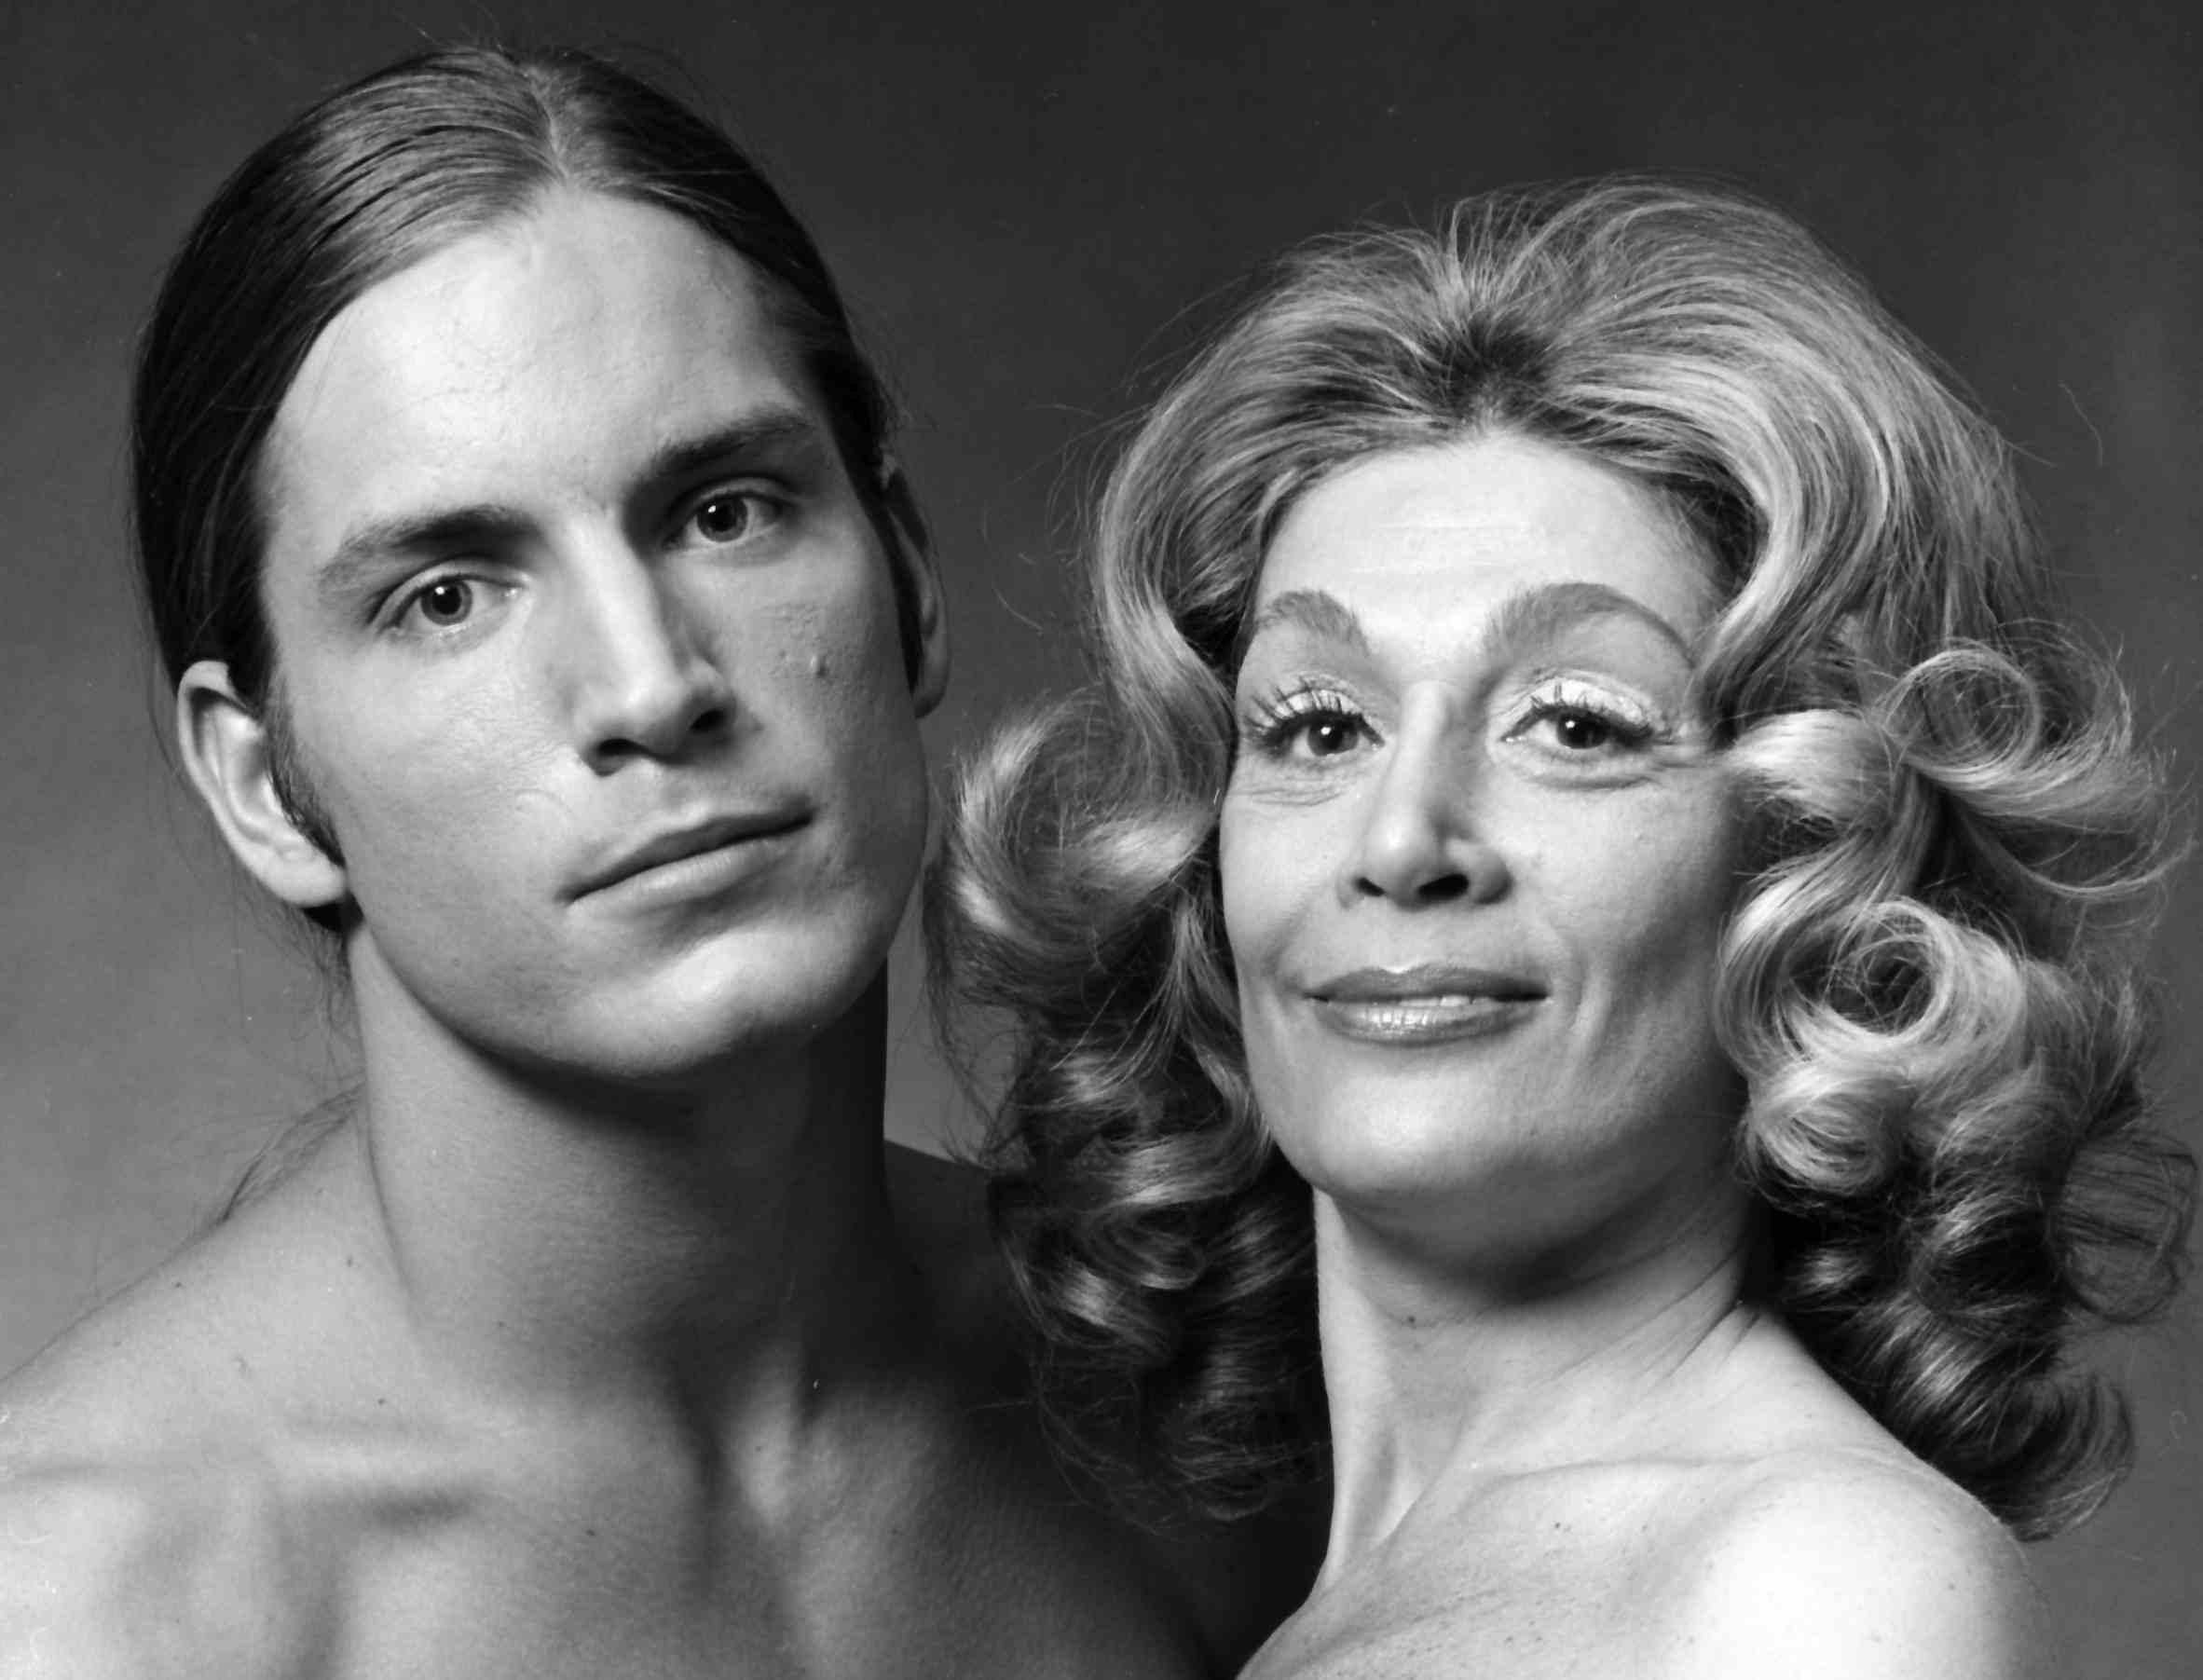 Andy Warhol 'Heat' Superstars Sylvia Miles & Joe Dallesandro nude for After Dark - Photograph by Jack Mitchell